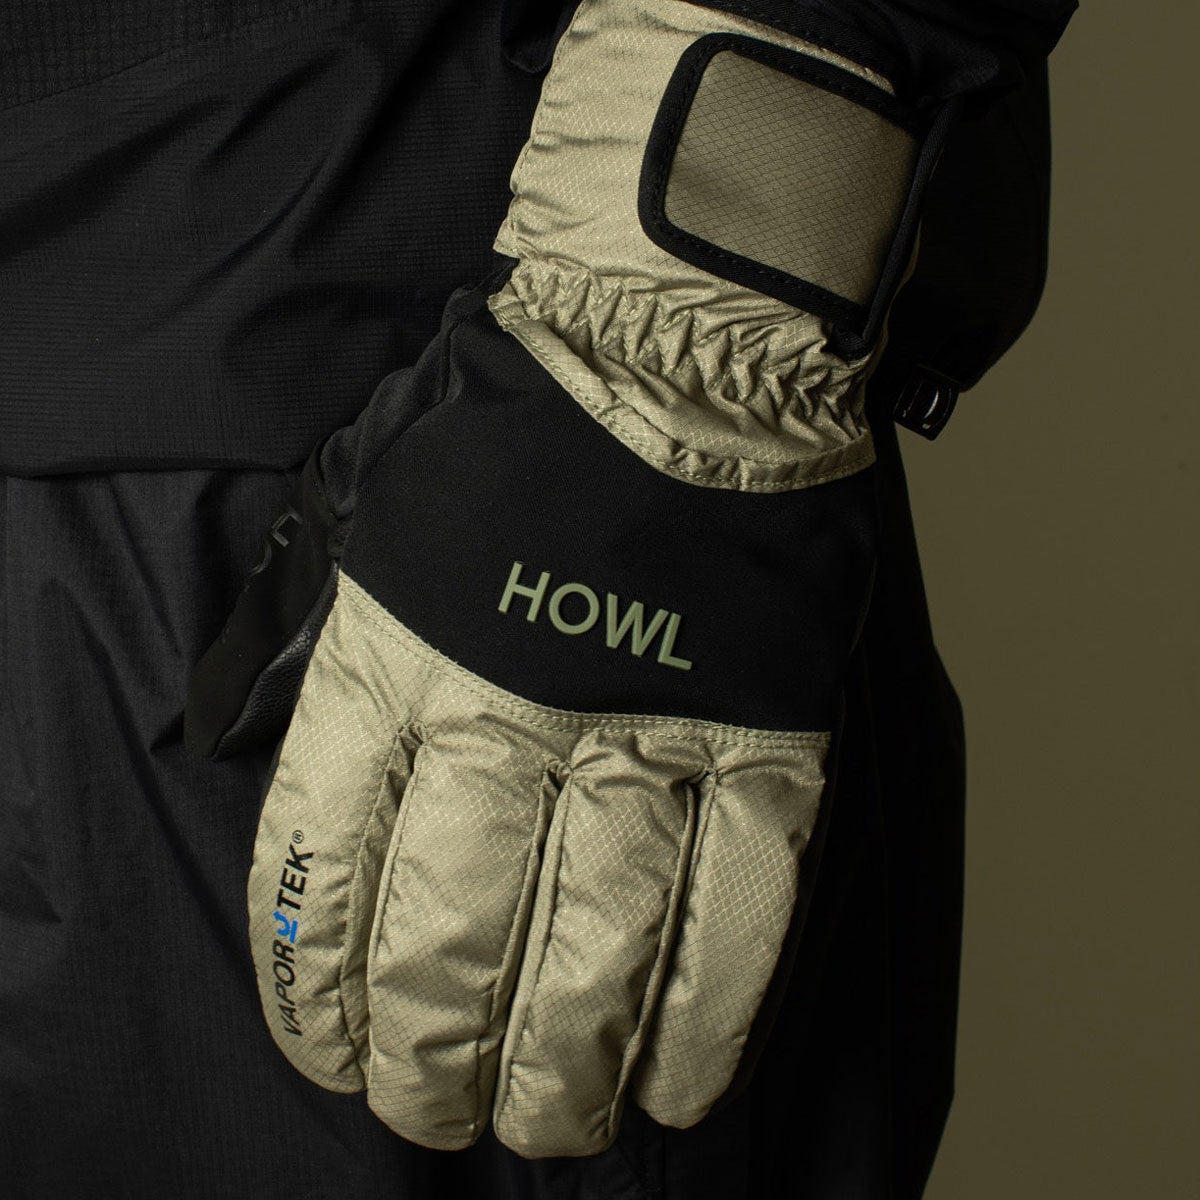 Howl Union Snowboard Gloves - Moss image 2